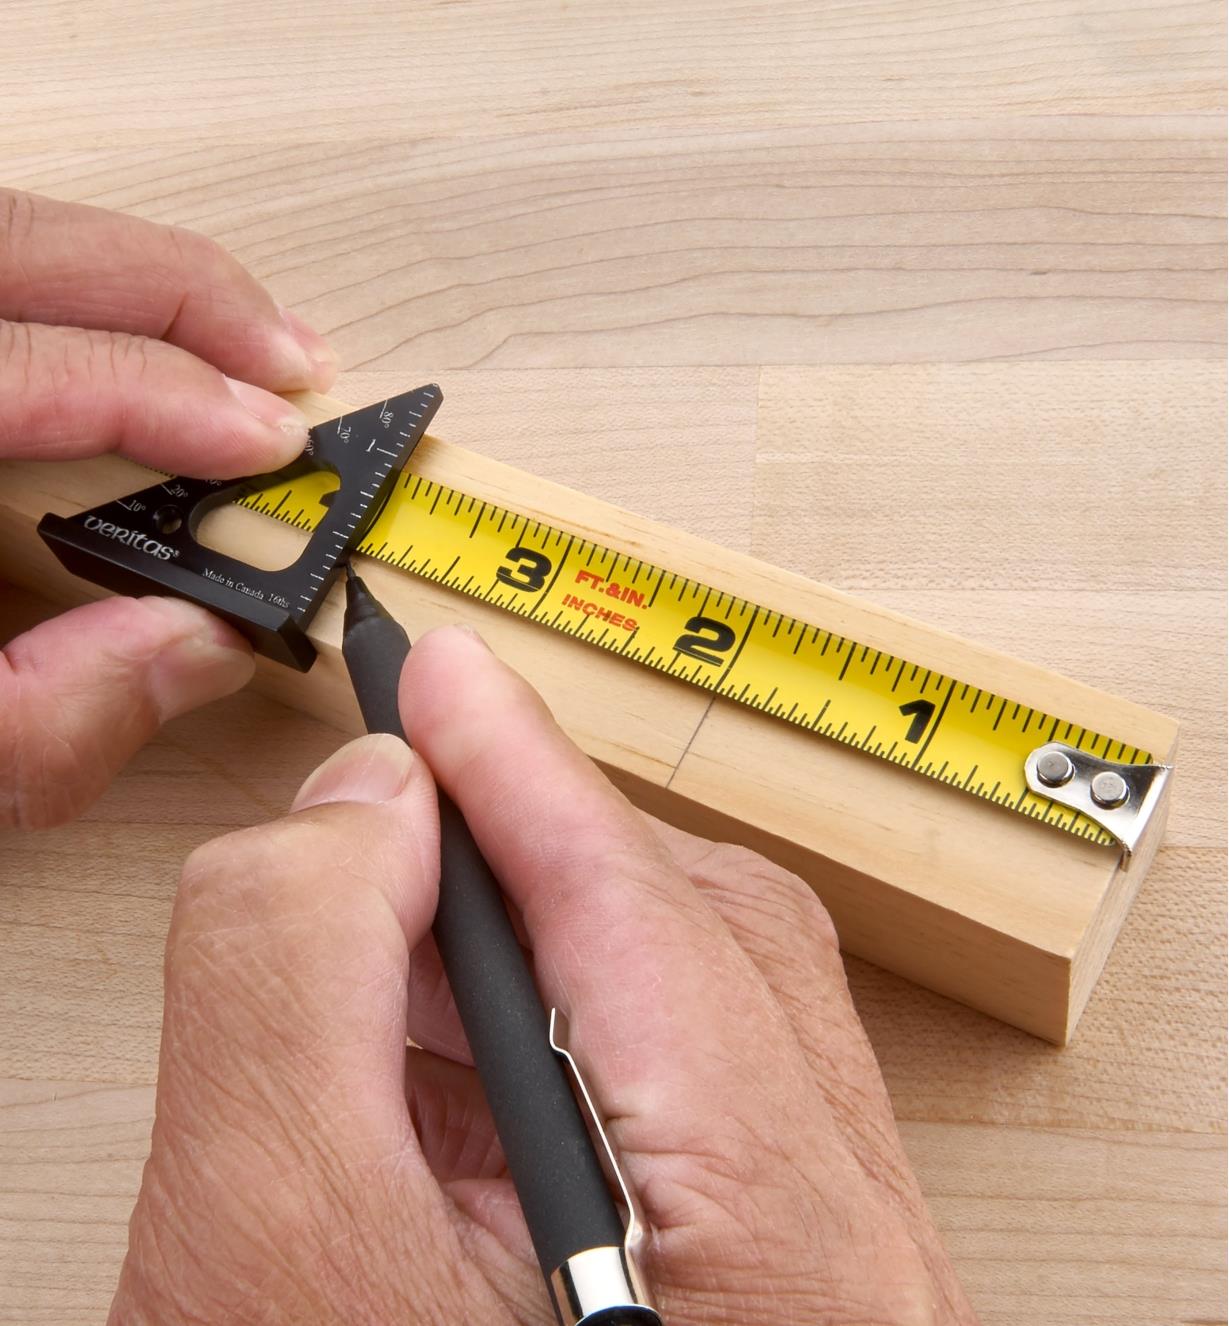 Using a Veritas 1 1/2"" Pocket Layout Square over a tape measure to strike a line on a workpiece